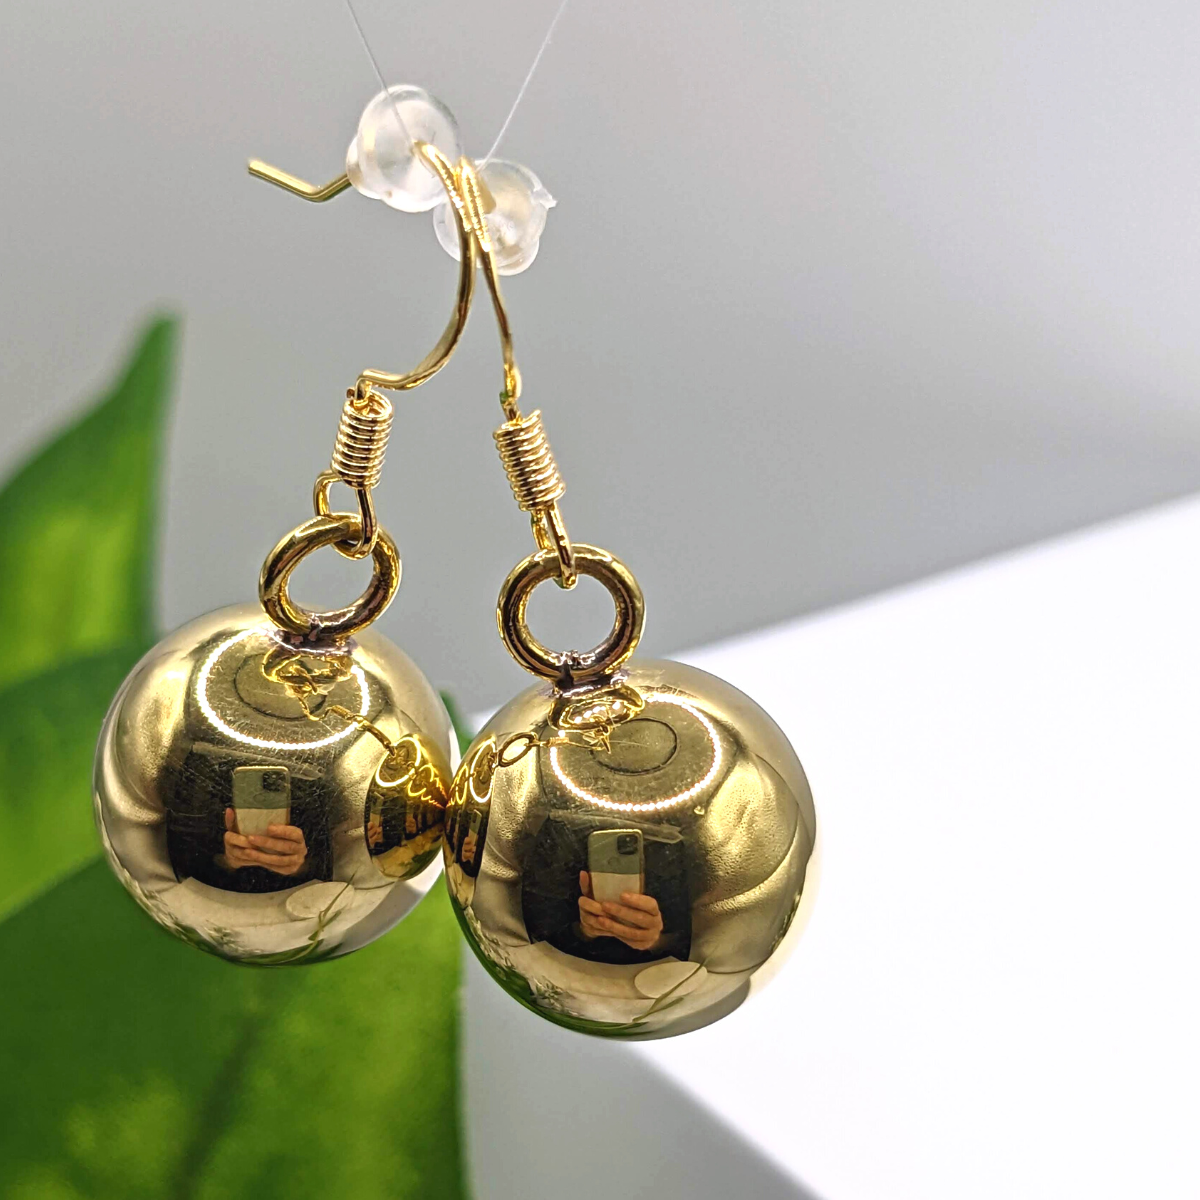 Gold Angel Caller Chime Earrings - Nature Reflections